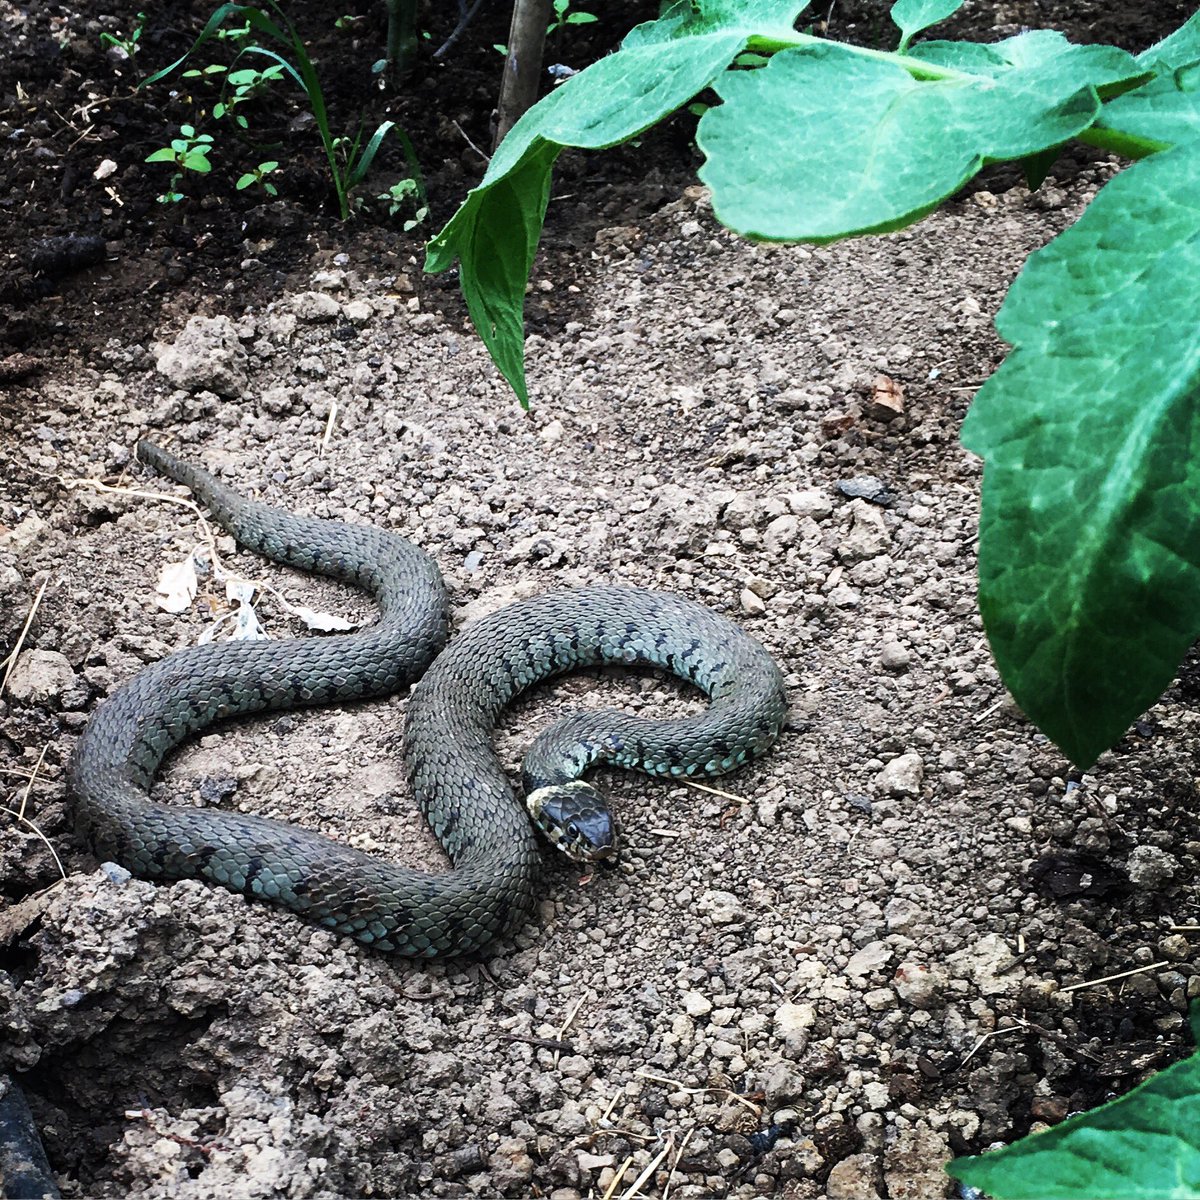 Today at Upper Lodge: Surprised a grass snake in the polytunnel #sussex #wildlifefriendlygardening